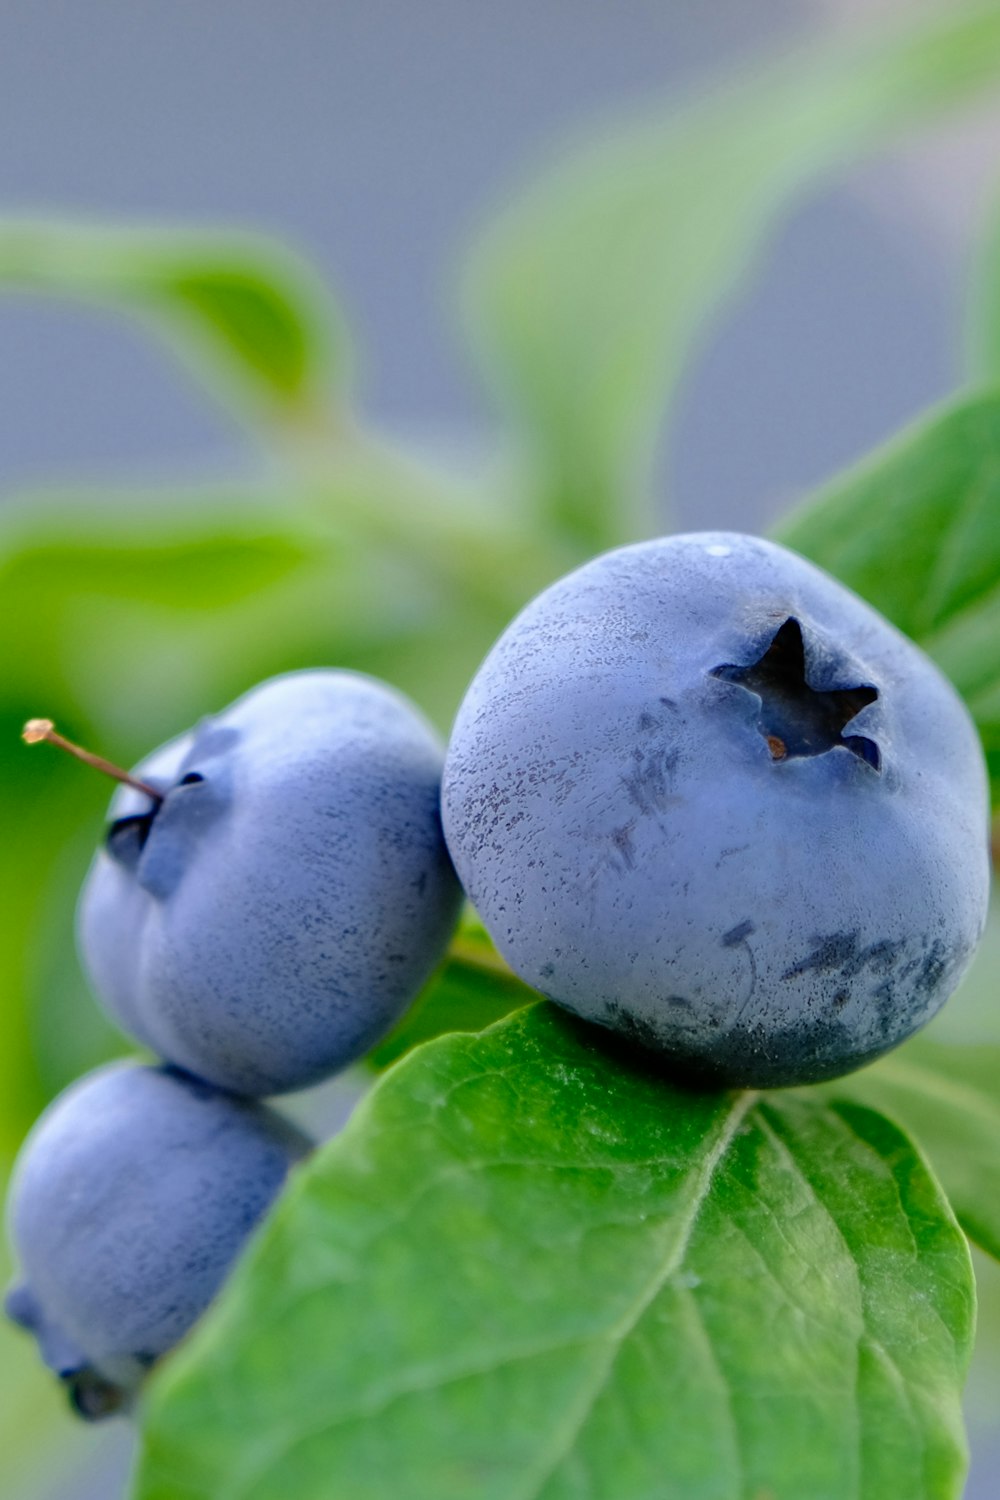 a close up of some blueberries on a green leaf